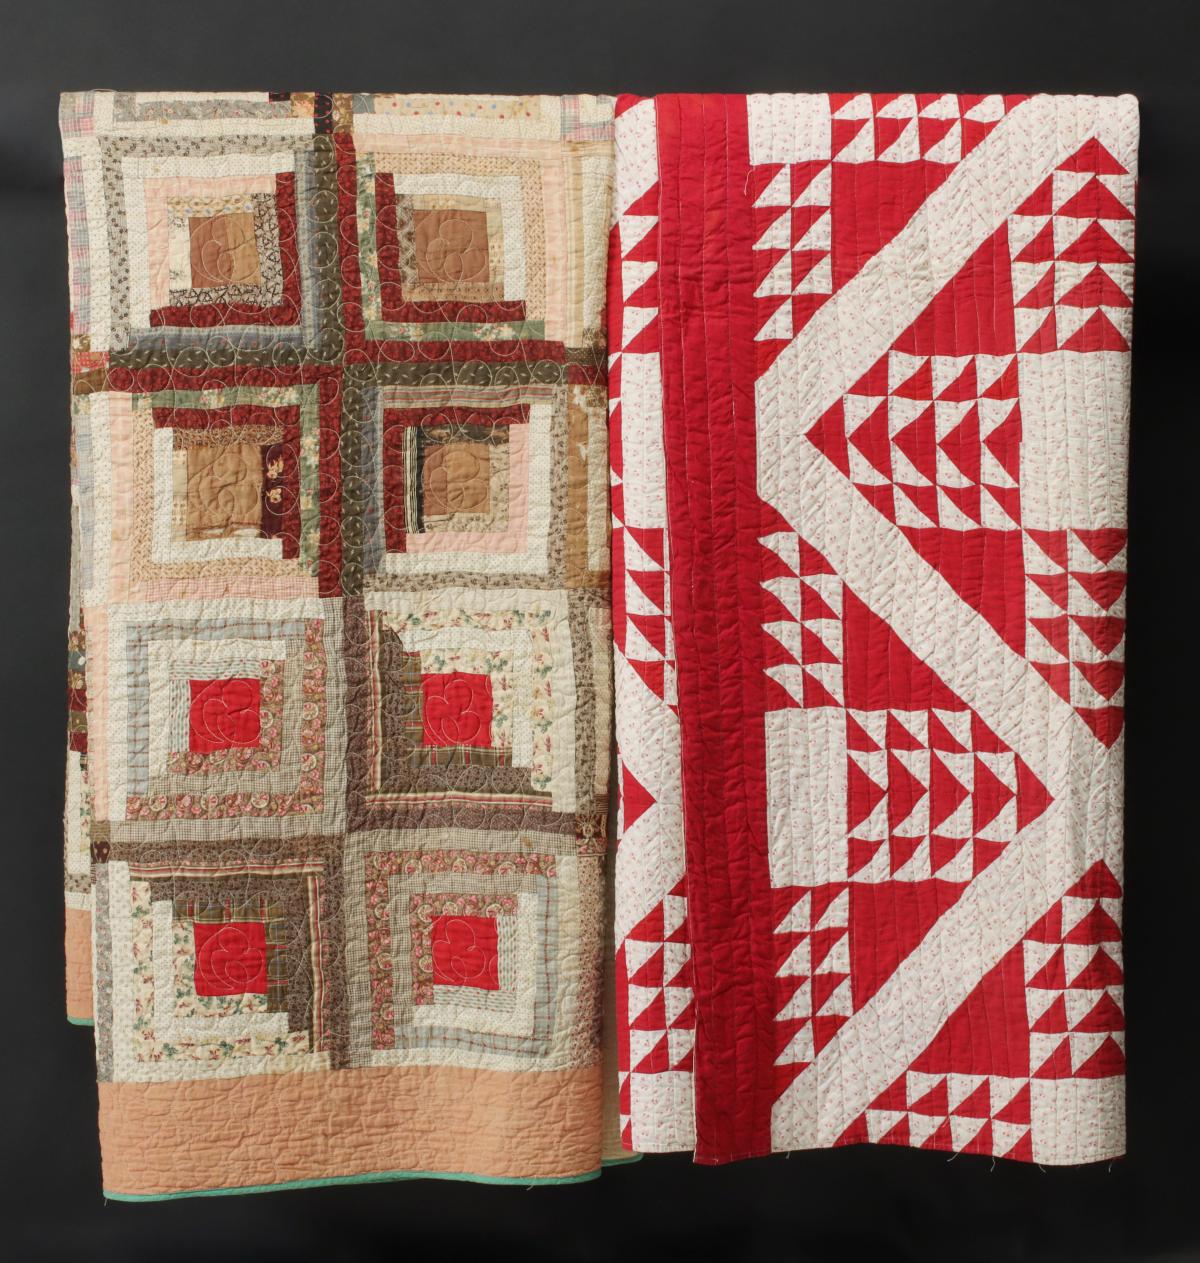 LOG CABIN AND FLYING GEESE PATTERN QUILTS